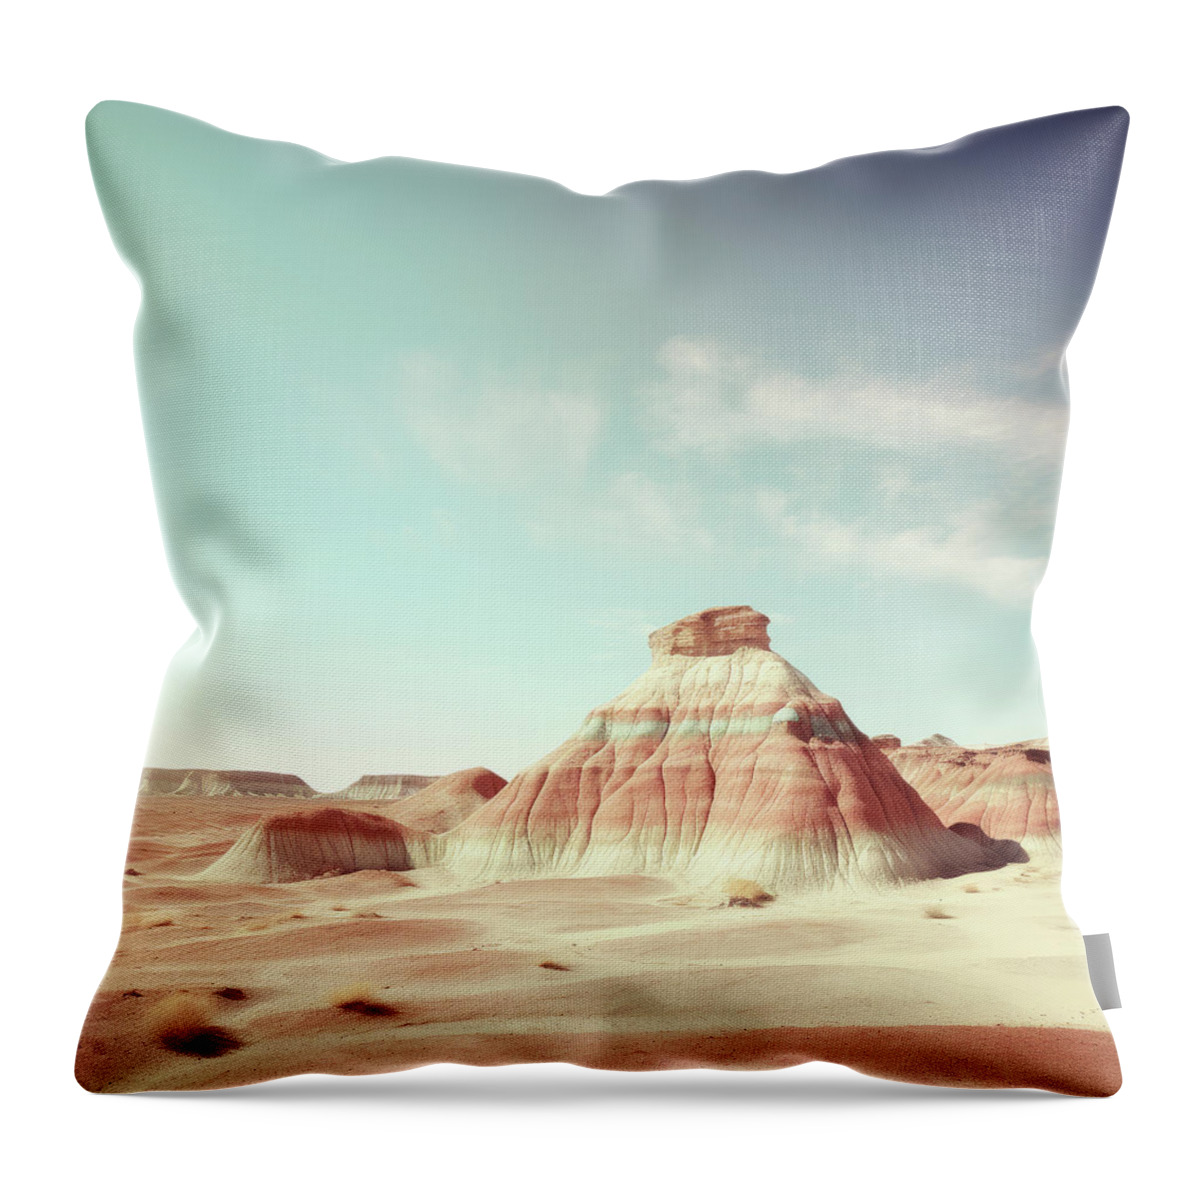 Blue Throw Pillow featuring the digital art Painted Desert of Small Hills by YoPedro